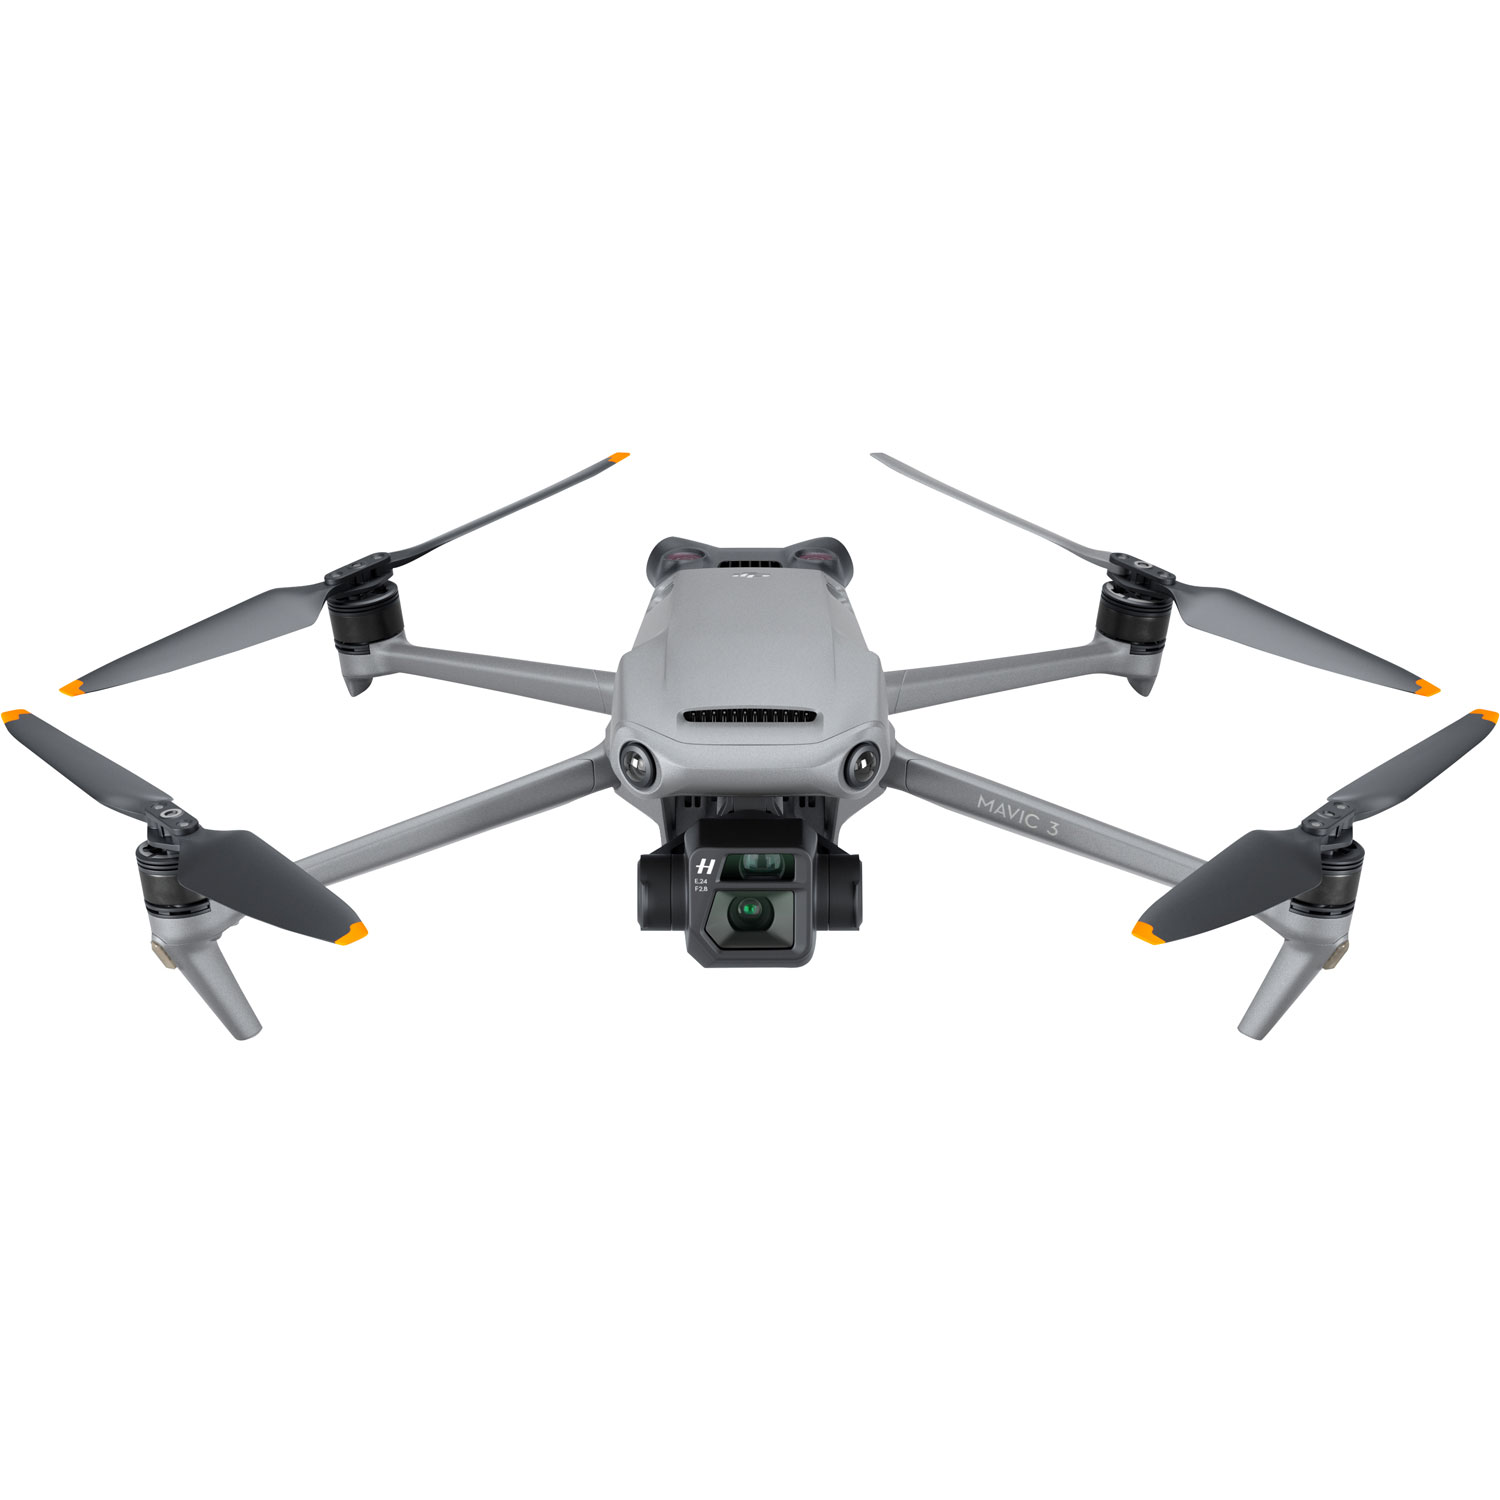 DJI Mavic 3 Quadcopter Drone with Camera & Controller - Ready-to-Fly - Grey